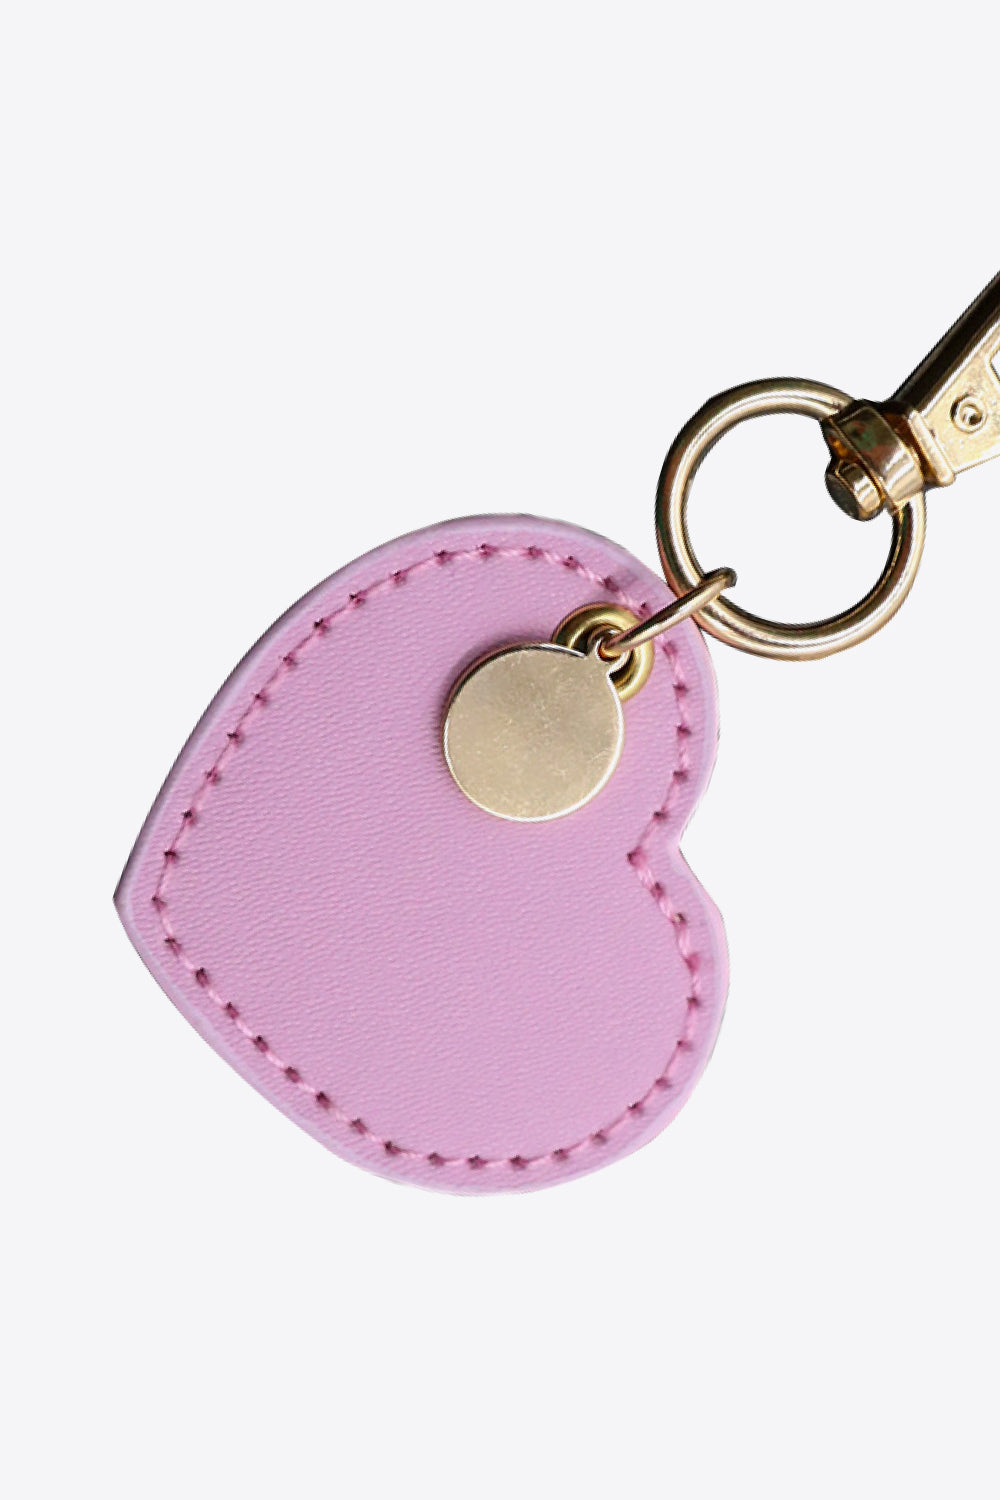 Lavender Assorted 4-Pack Heart Shape PU Leather Keychain Key Chains